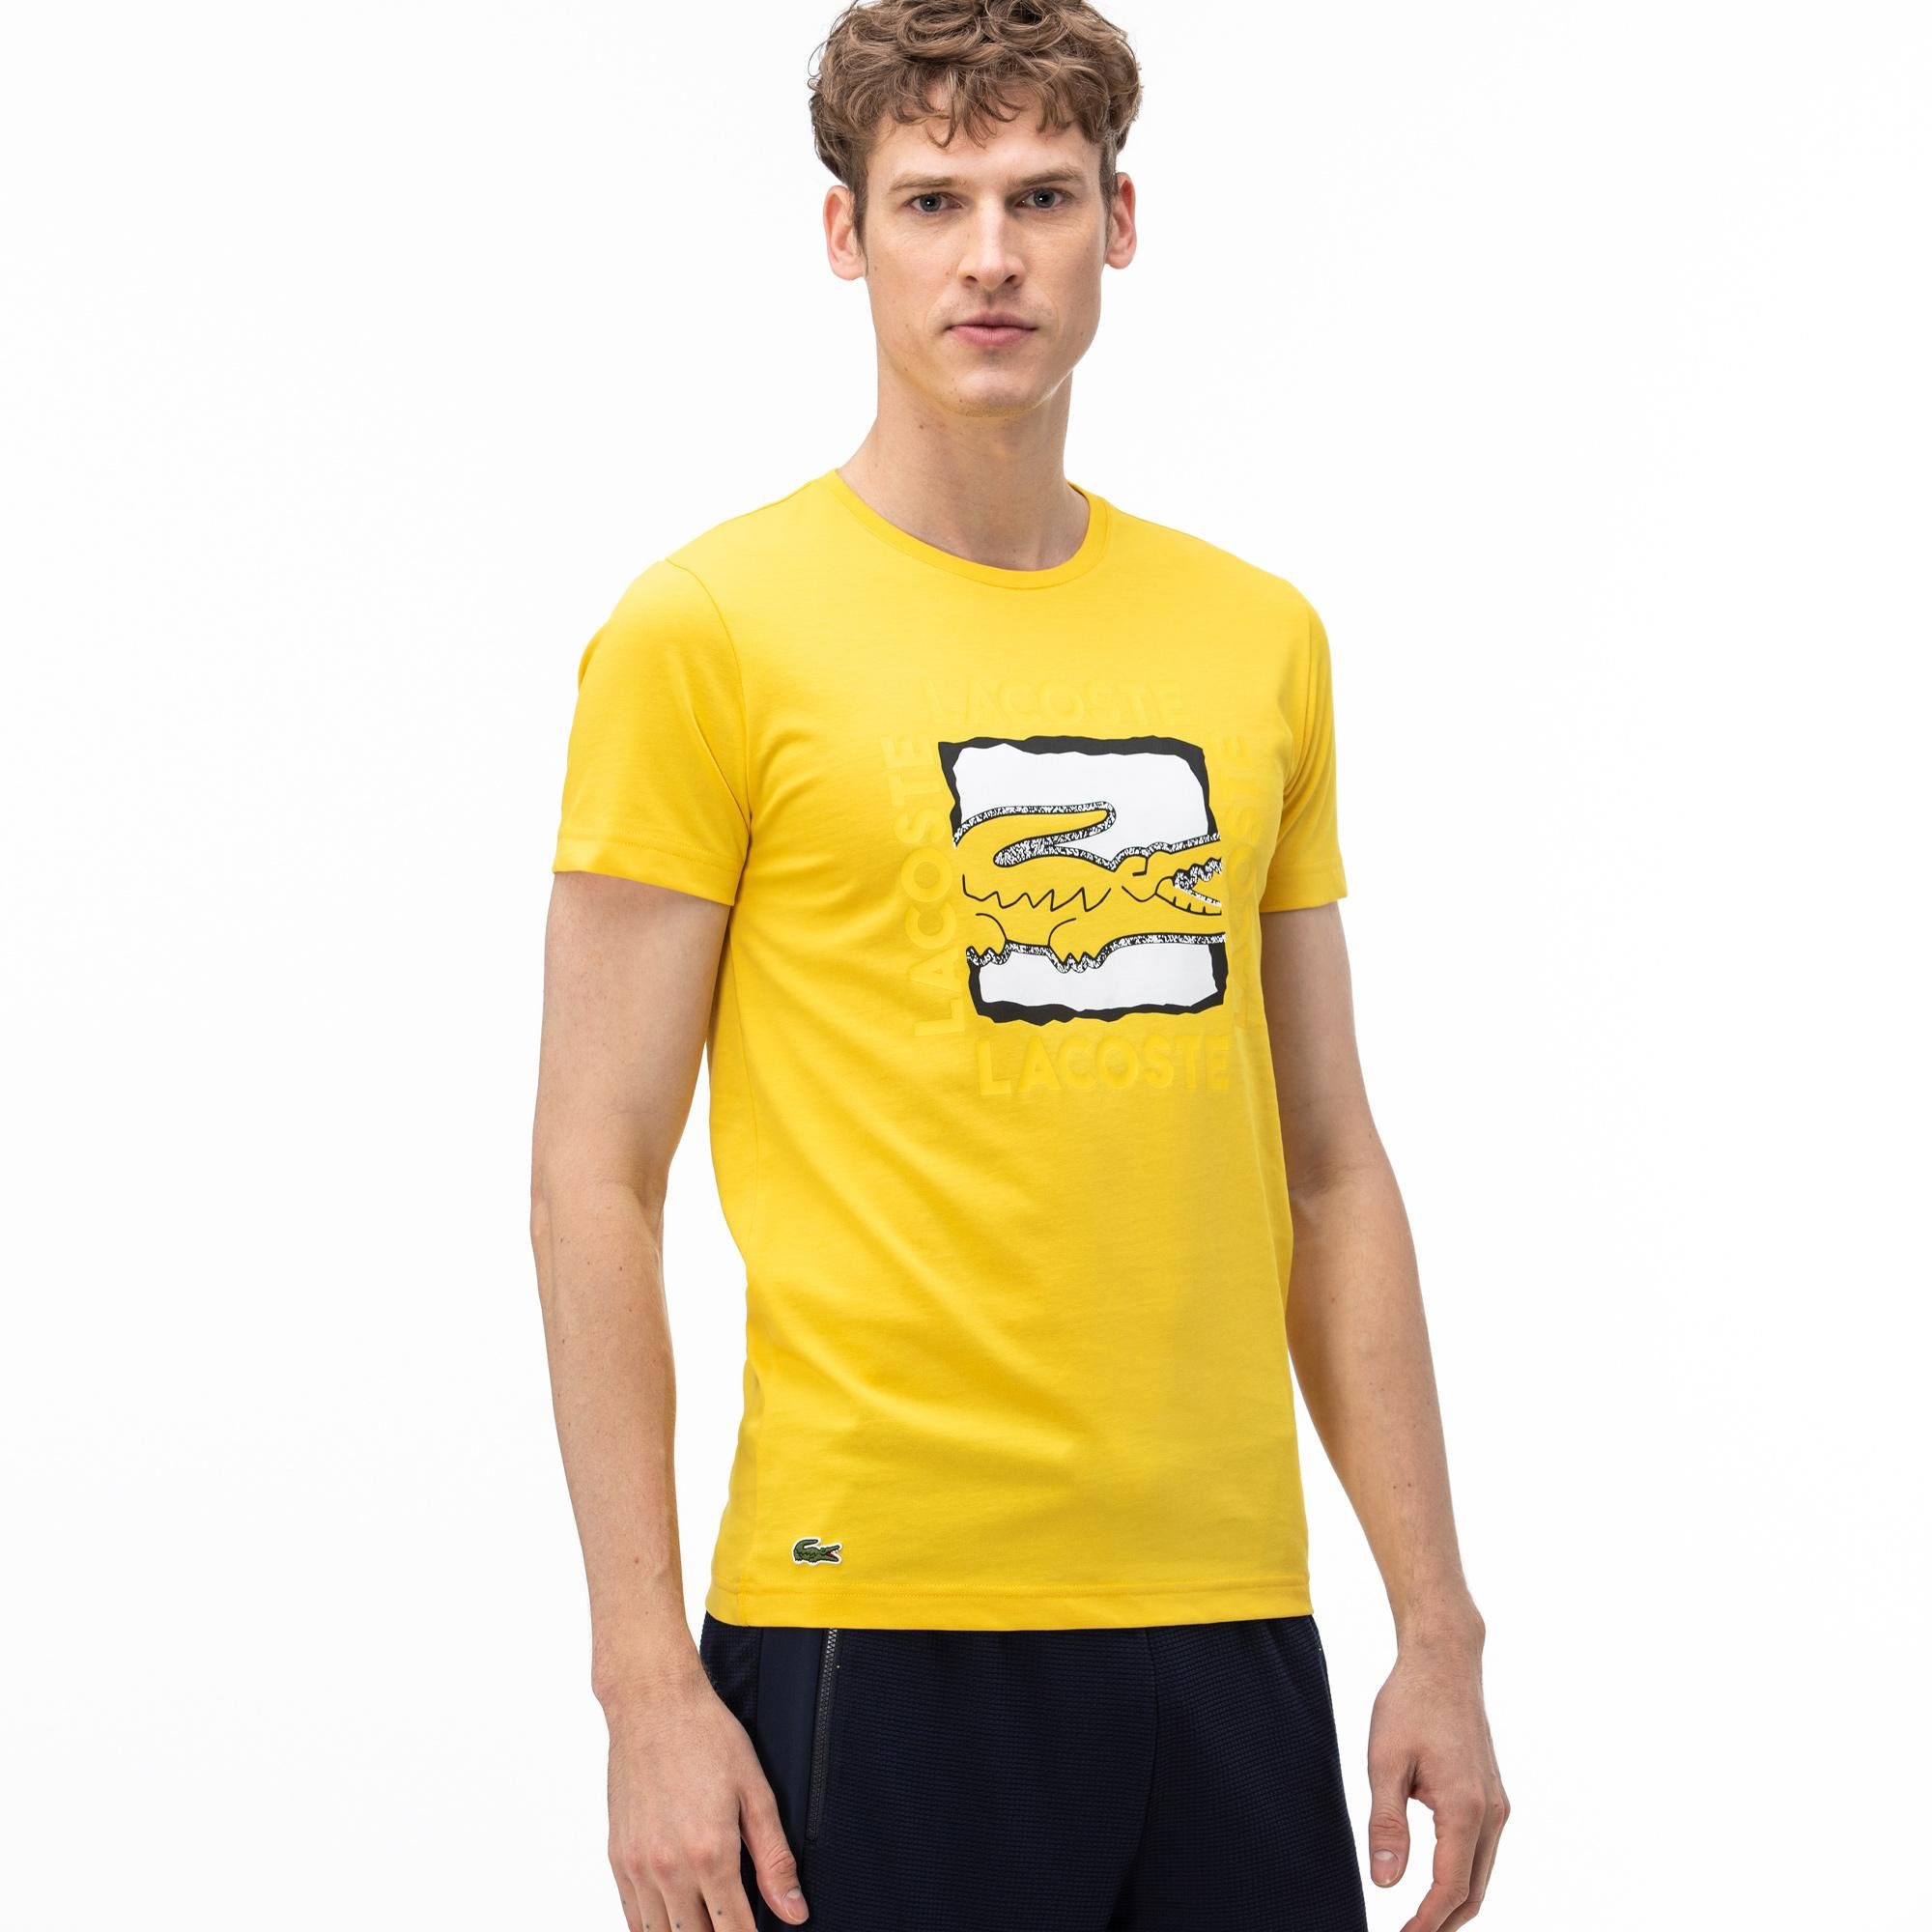 Lacoste Men's Sportowy T-Shirt with pattern 3D